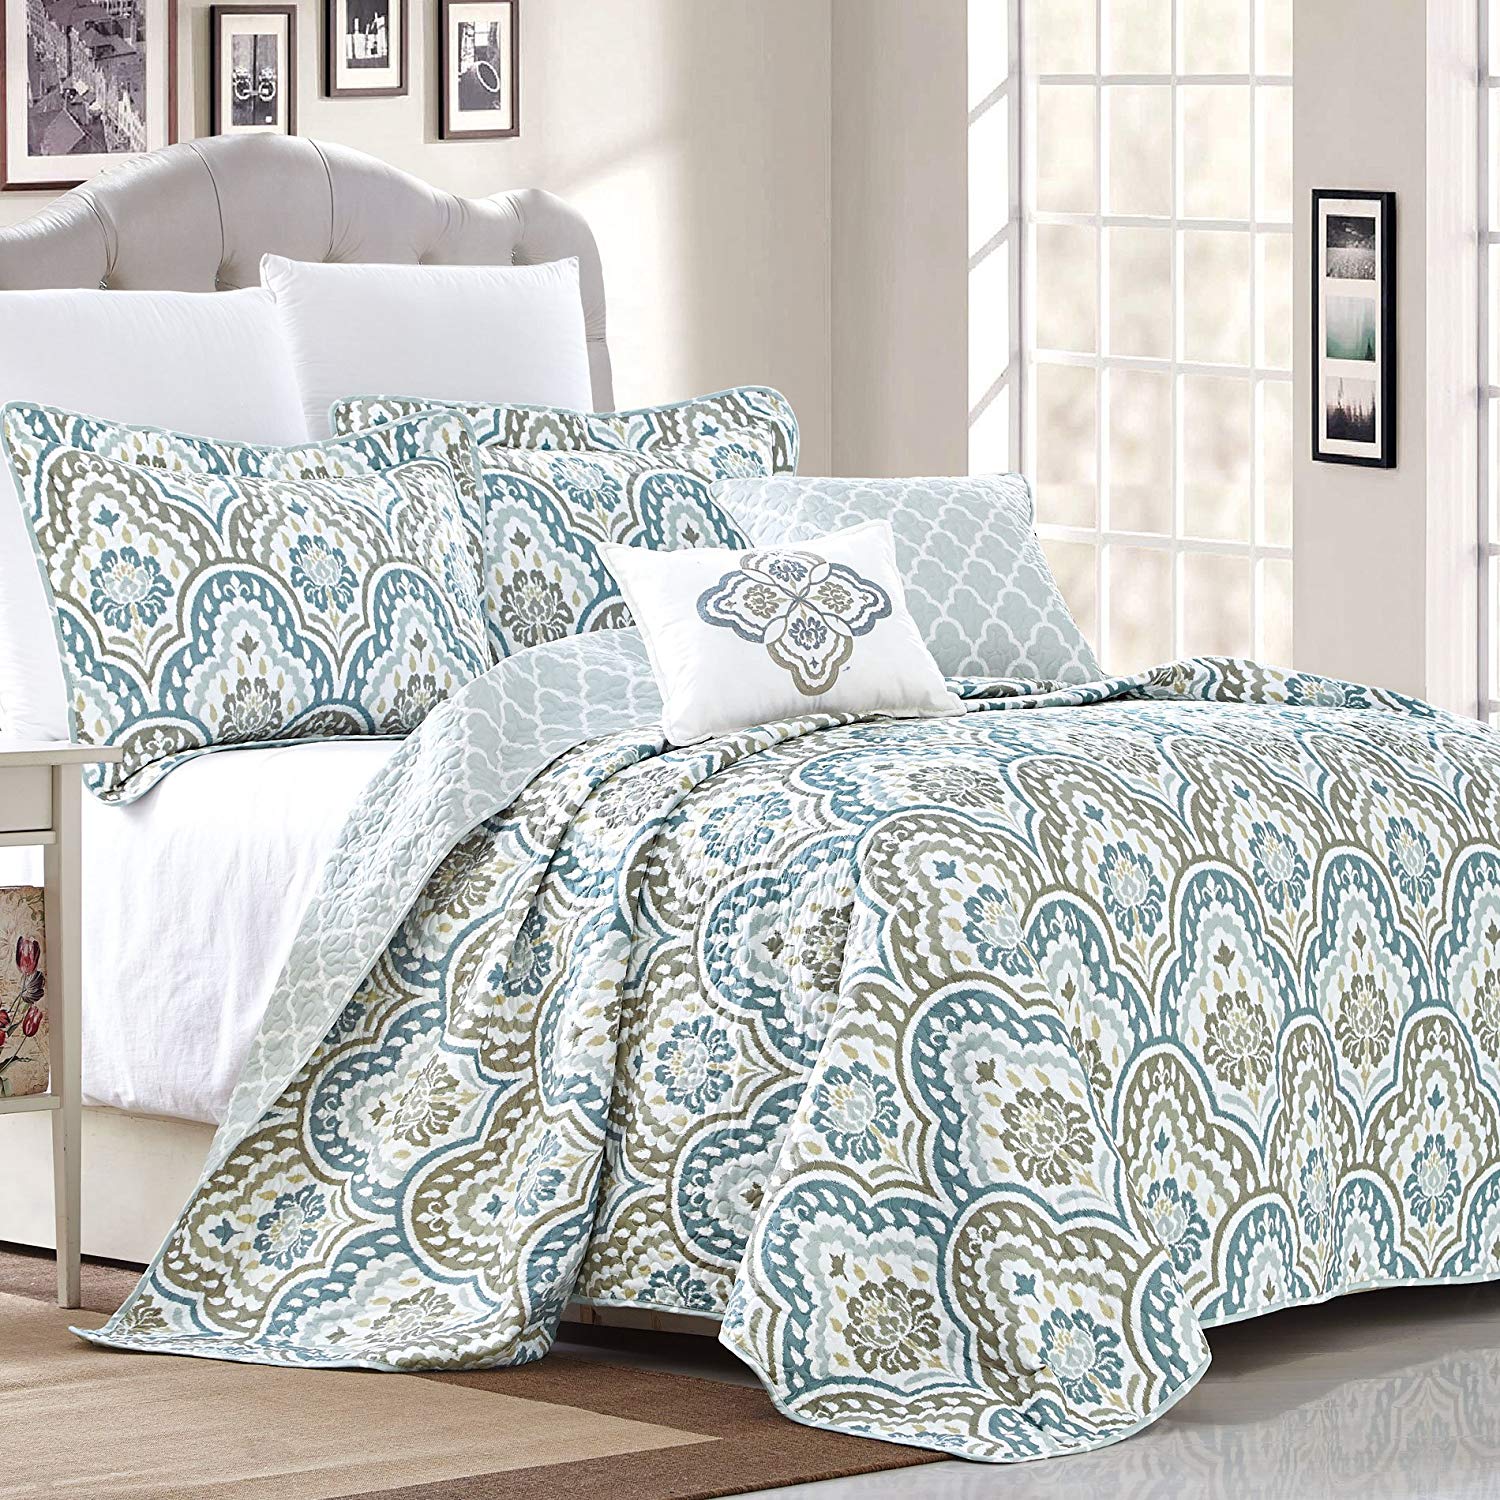 Home Soft Things Teal Aqua Queen Size Coverlet Set, 5 Piece